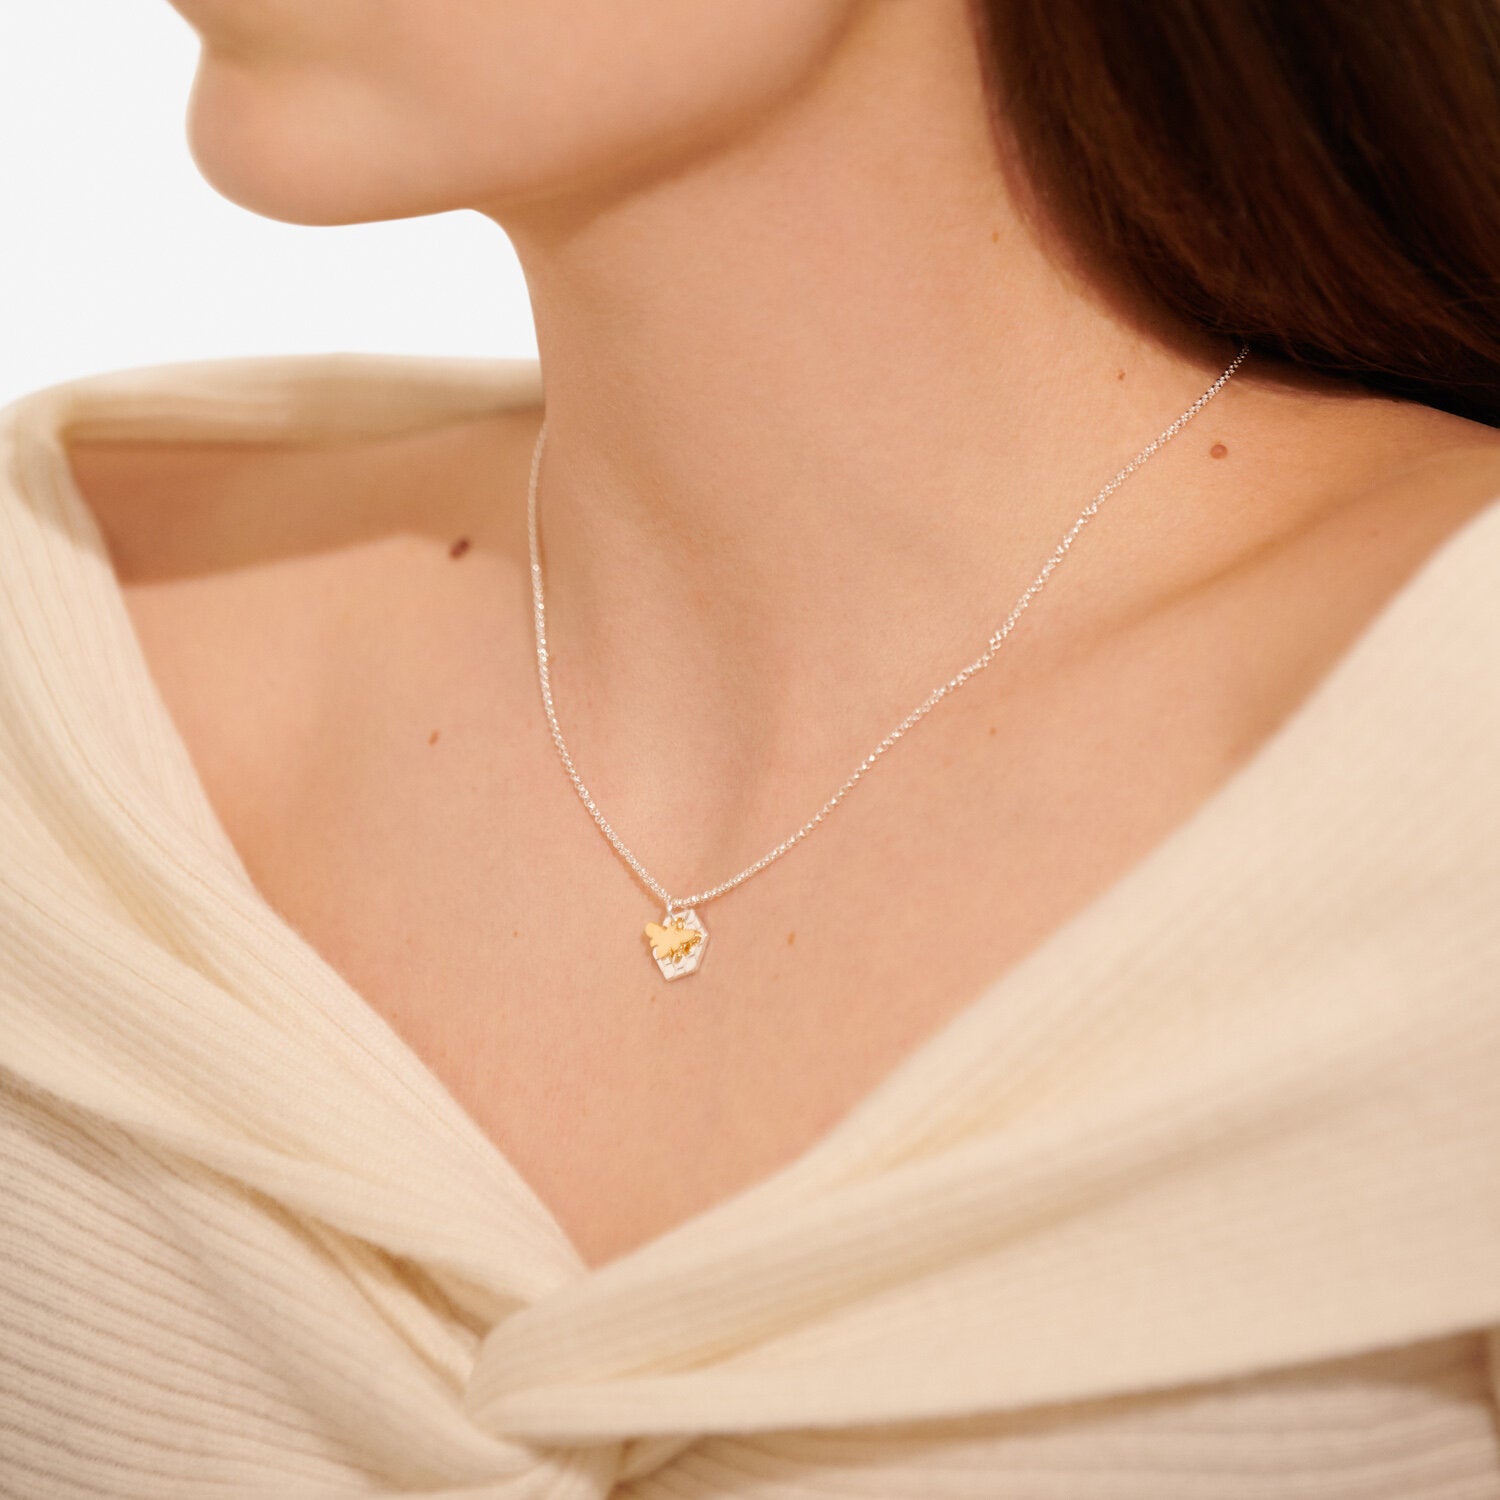 A Little - You're The Bees Knees Necklace - Joma jewellery